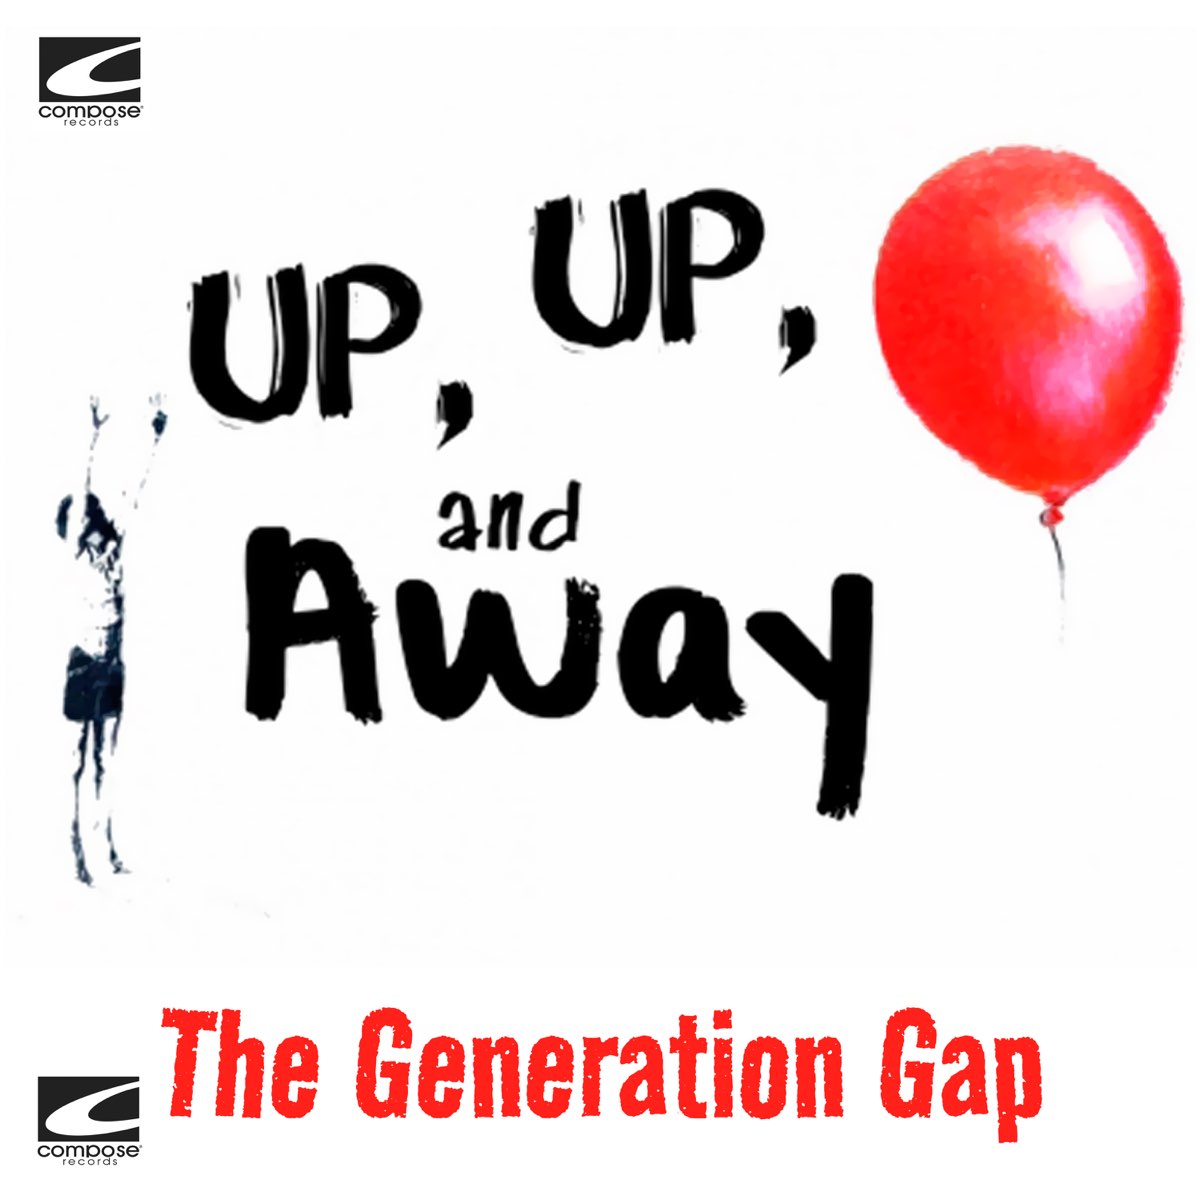 Generation gap. “Generation gap”презентация. Up and away. Up and away 1